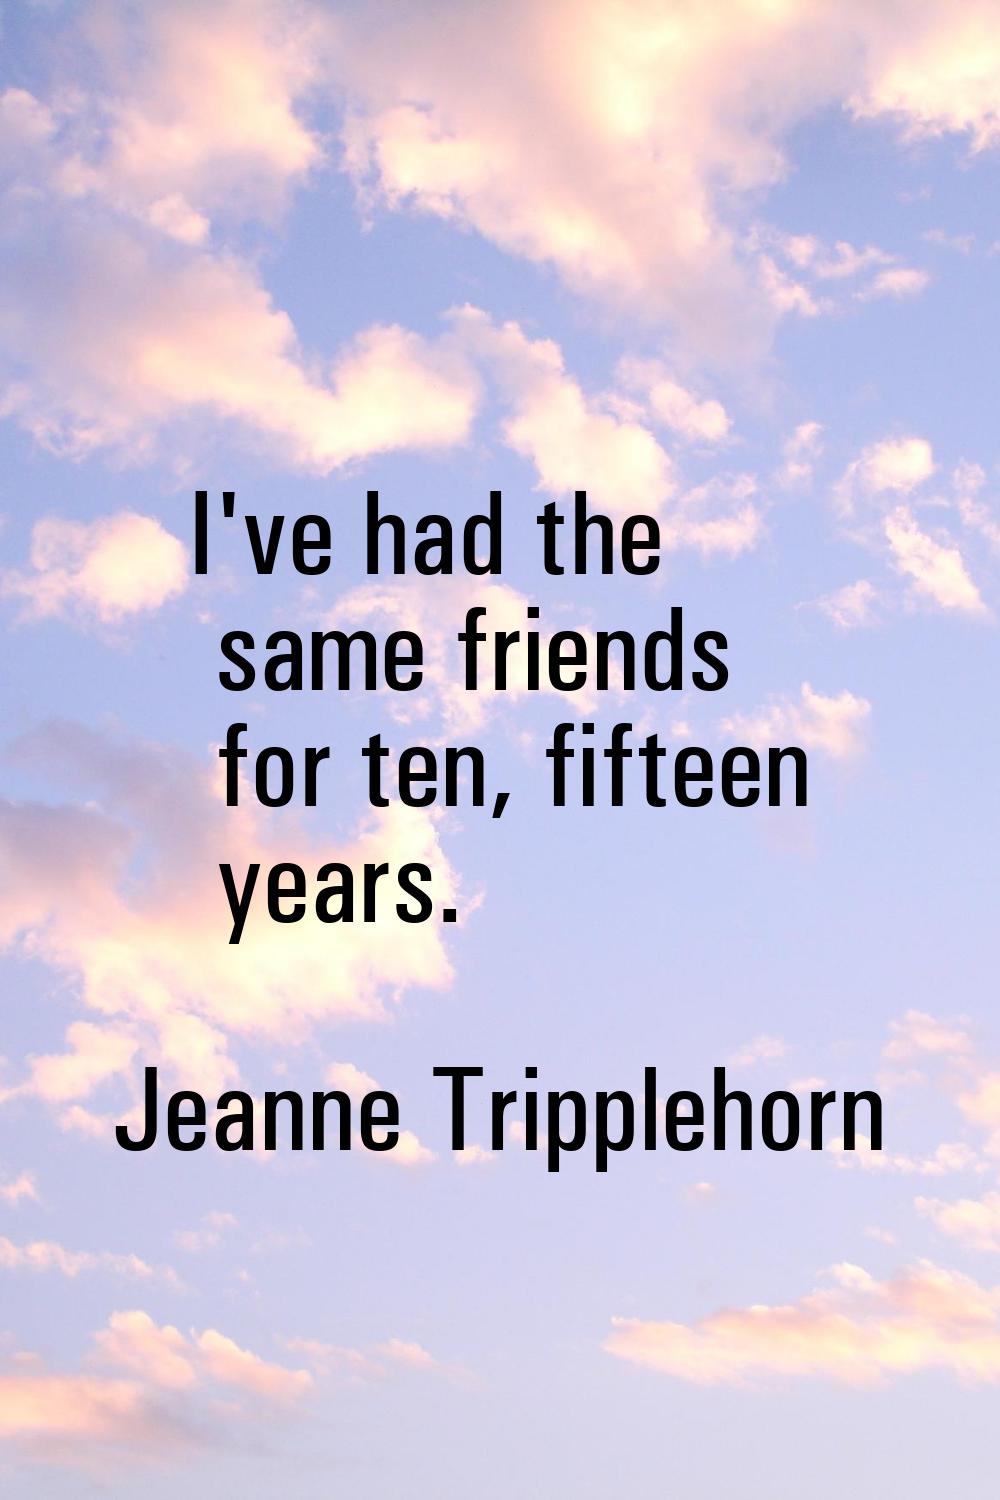 I've had the same friends for ten, fifteen years.